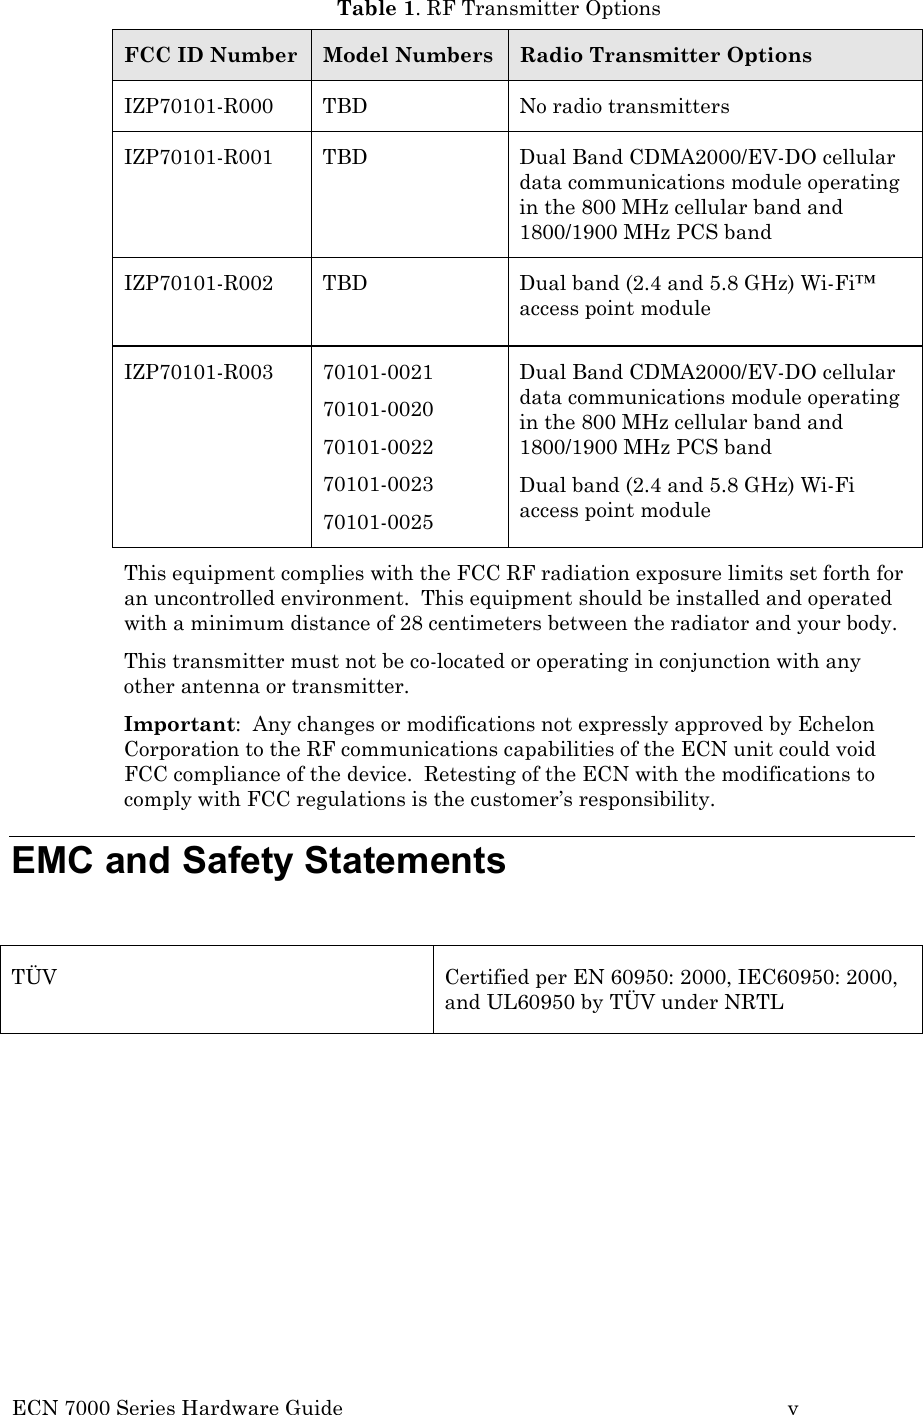 ECN 7000 Series Hardware Guide        v Table 1. RF Transmitter Options FCC ID Number Model Numbers Radio Transmitter Options  IZP70101-R000  TBD No radio transmitters IZP70101-R001  TBD Dual Band CDMA2000/EV-DO cellular data communications module operating in the 800 MHz cellular band and 1800/1900 MHz PCS band IZP70101-R002  TBD Dual band (2.4 and 5.8 GHz) Wi-Fi™ access point module IZP70101-R003 70101-0021  70101-0020  70101-0022  70101-0023  70101-0025 Dual Band CDMA2000/EV-DO cellular data communications module operating in the 800 MHz cellular band and 1800/1900 MHz PCS band Dual band (2.4 and 5.8 GHz) Wi-Fi access point module This equipment complies with the FCC RF radiation exposure limits set forth for an uncontrolled environment.  This equipment should be installed and operated with a minimum distance of 28 centimeters between the radiator and your body. This transmitter must not be co-located or operating in conjunction with any other antenna or transmitter. Important:  Any changes or modifications not expressly approved by Echelon Corporation to the RF communications capabilities of the ECN unit could void FCC compliance of the device.  Retesting of the ECN with the modifications to comply with FCC regulations is the customer’s responsibility. EMC and Safety Statements  TÜV Certified per EN 60950: 2000, IEC60950: 2000, and UL60950 by TÜV under NRTL   